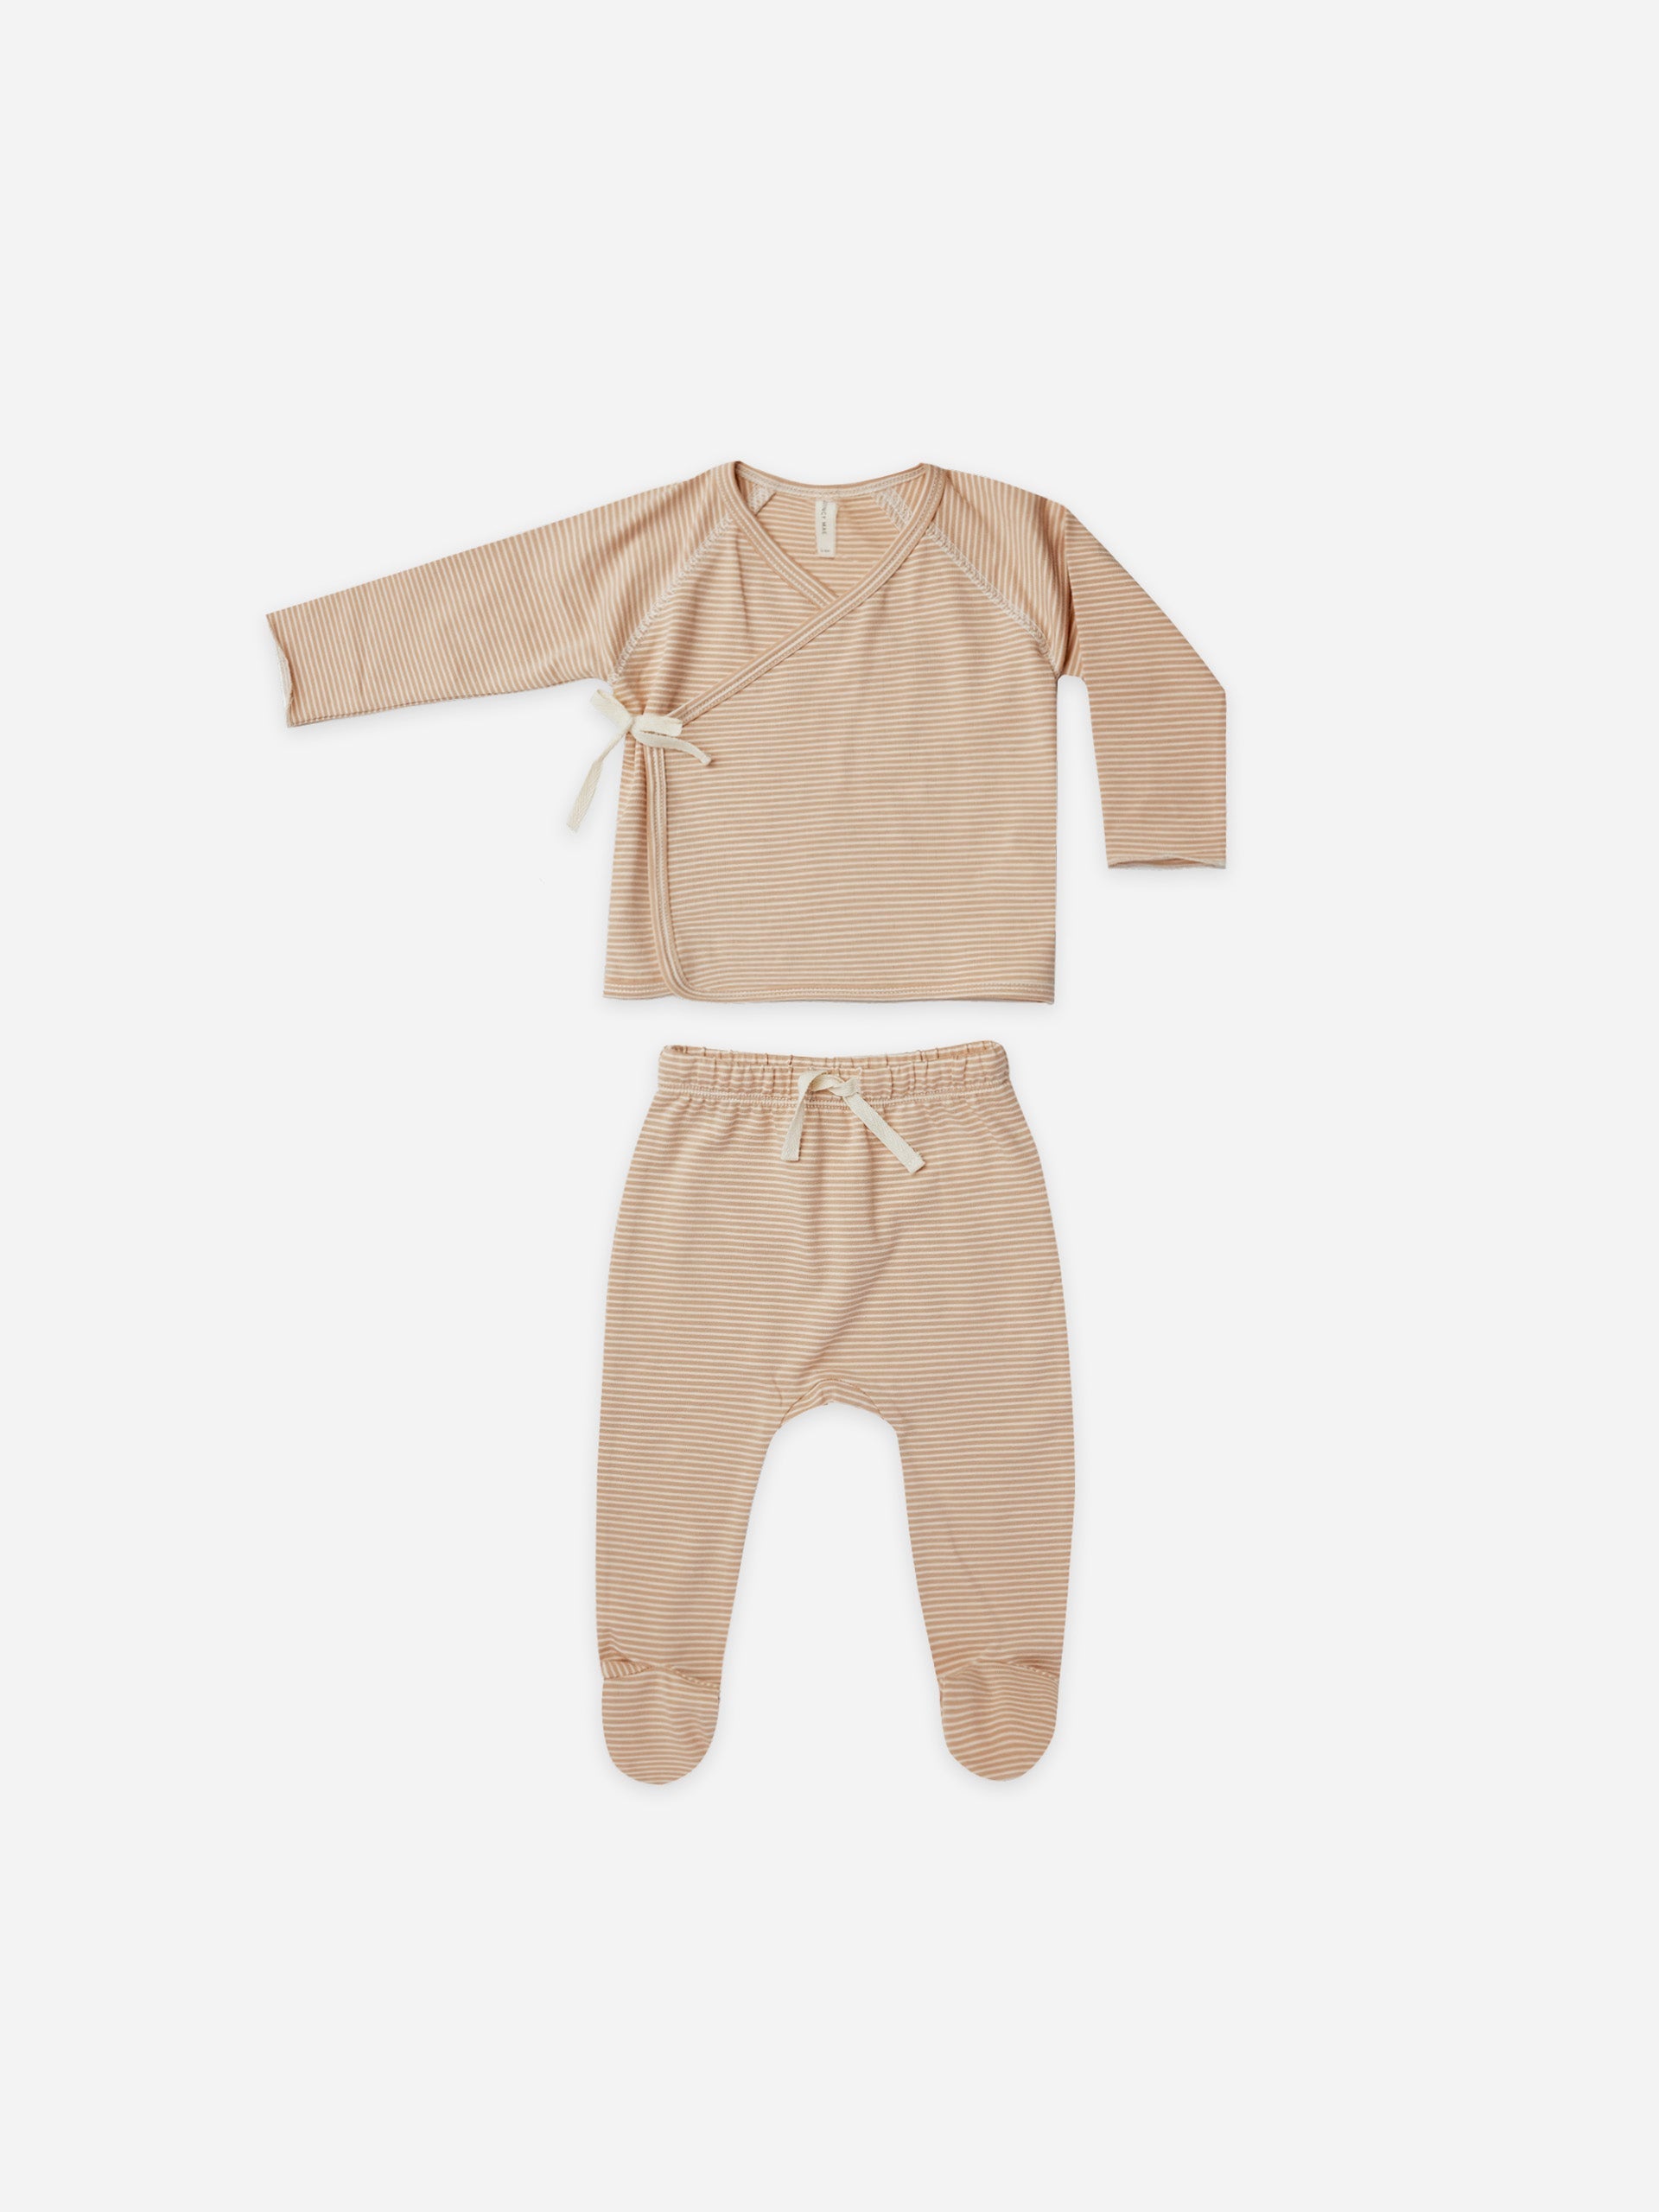 wrap top + pant set | apricot stripe - Quincy Mae | Baby Basics | Baby Clothing | Organic Baby Clothes | Modern Baby Boy Clothes |